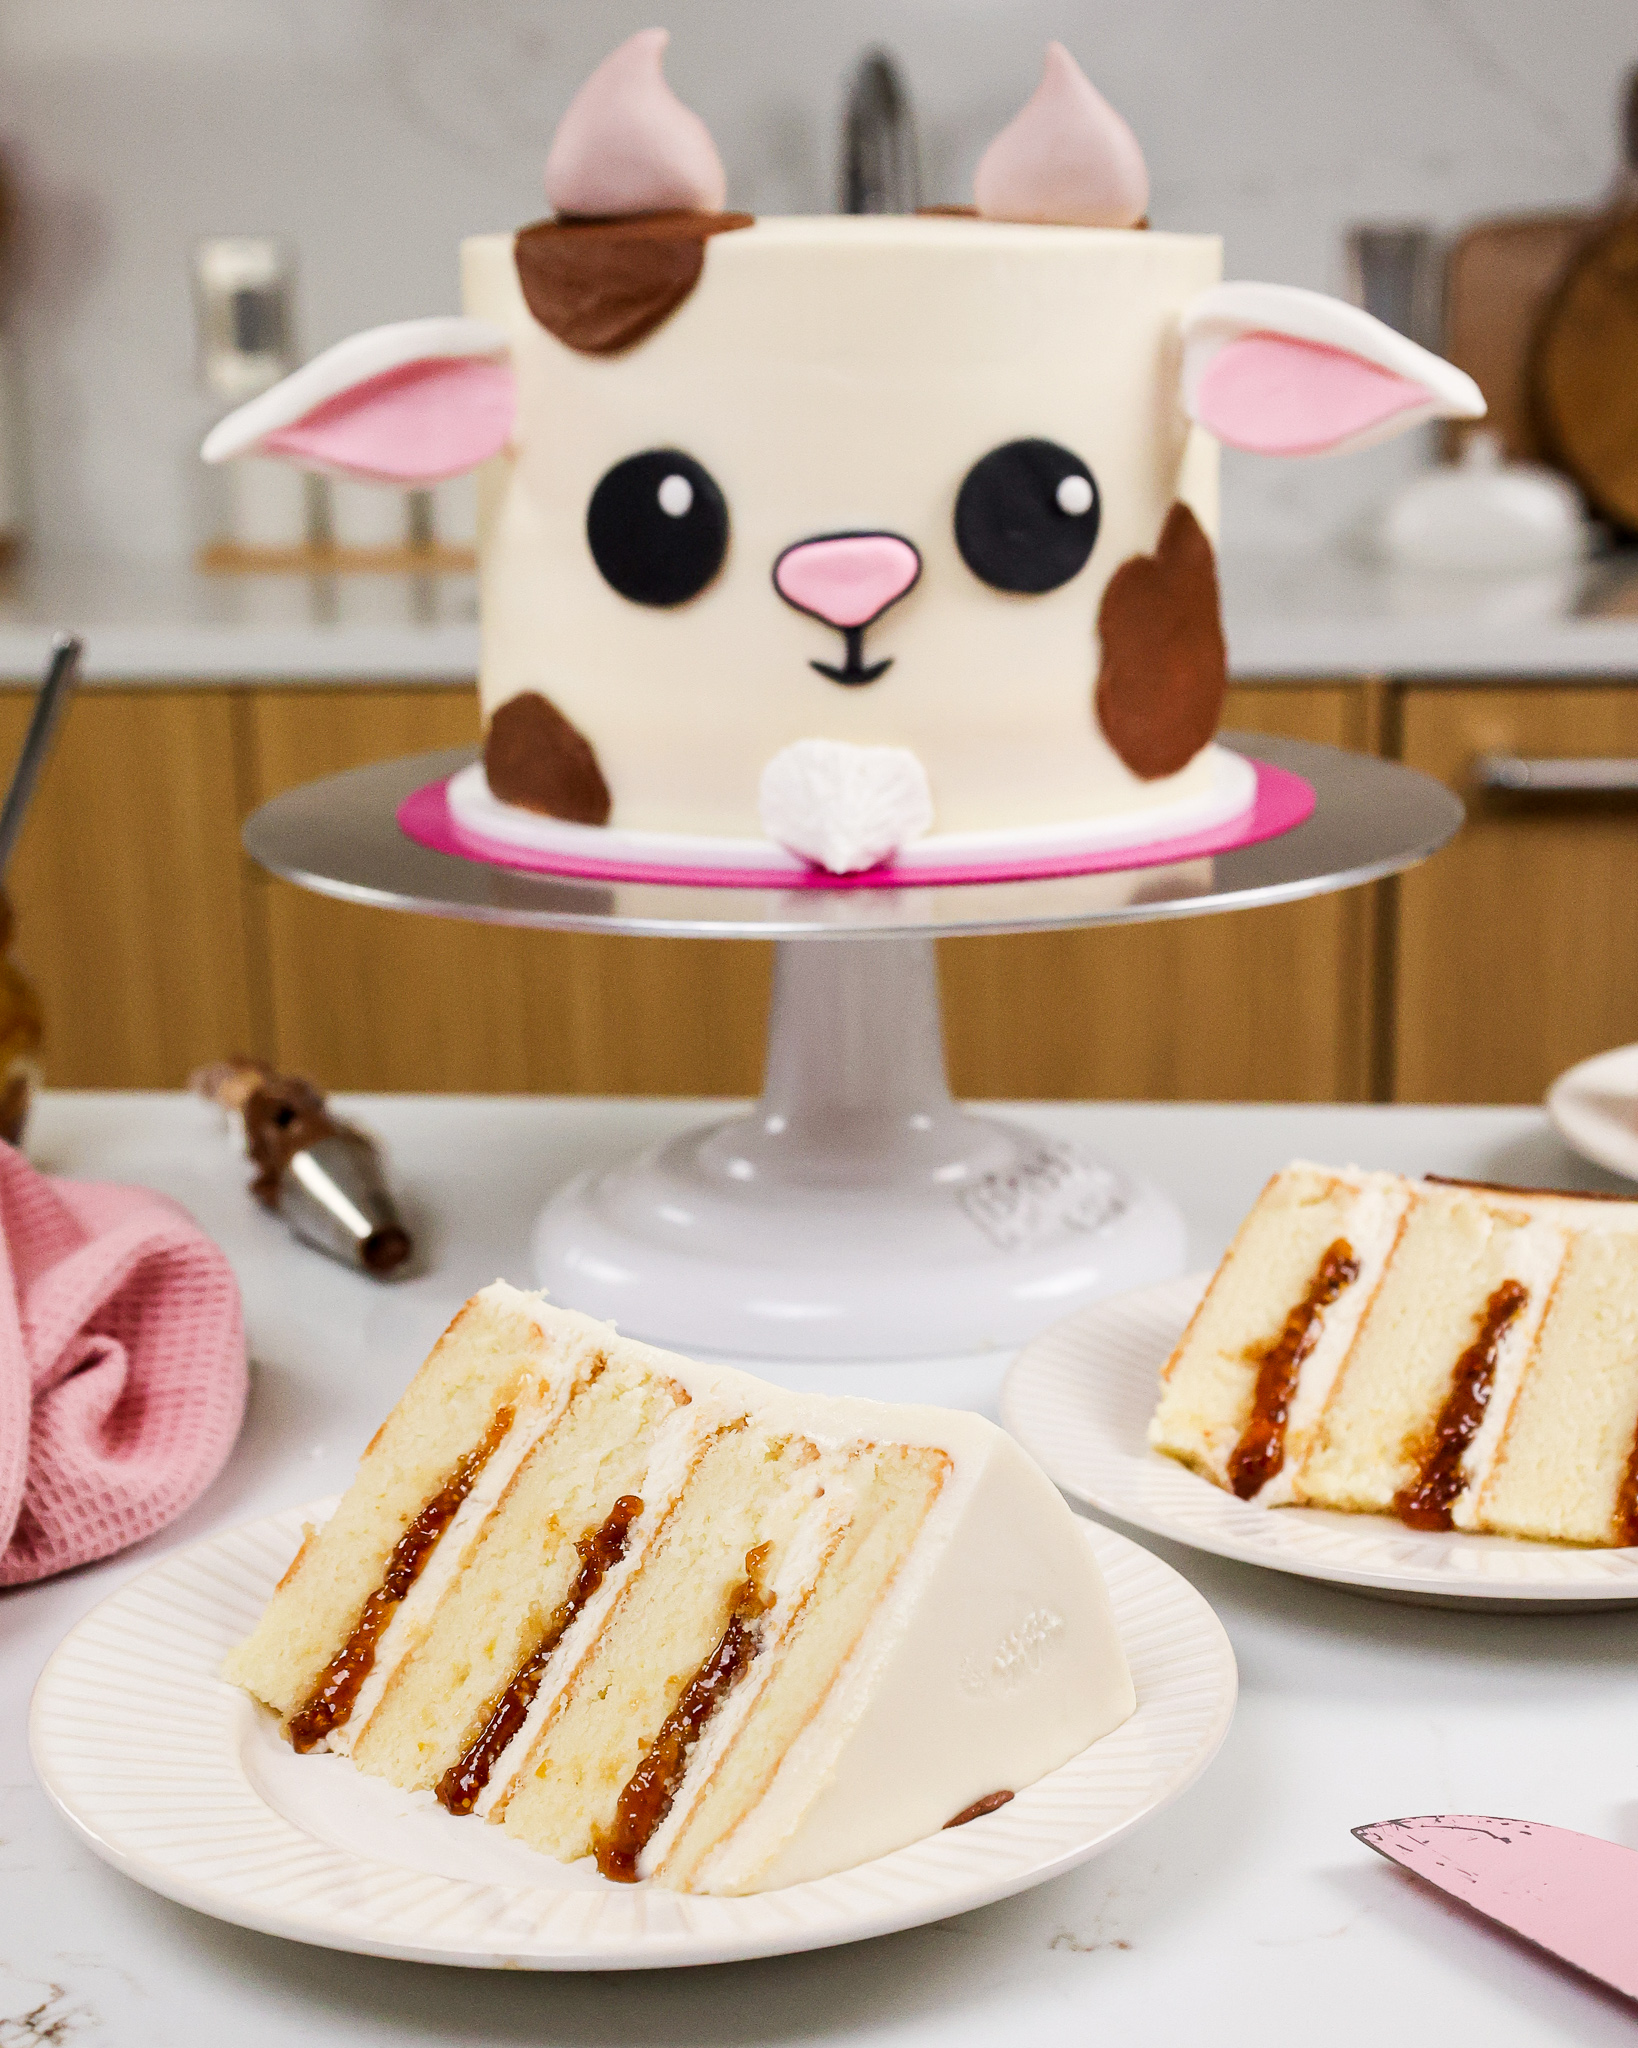 image of a goat cake made to look like a cute little goat and filled with goat cheese frosting and fig jam